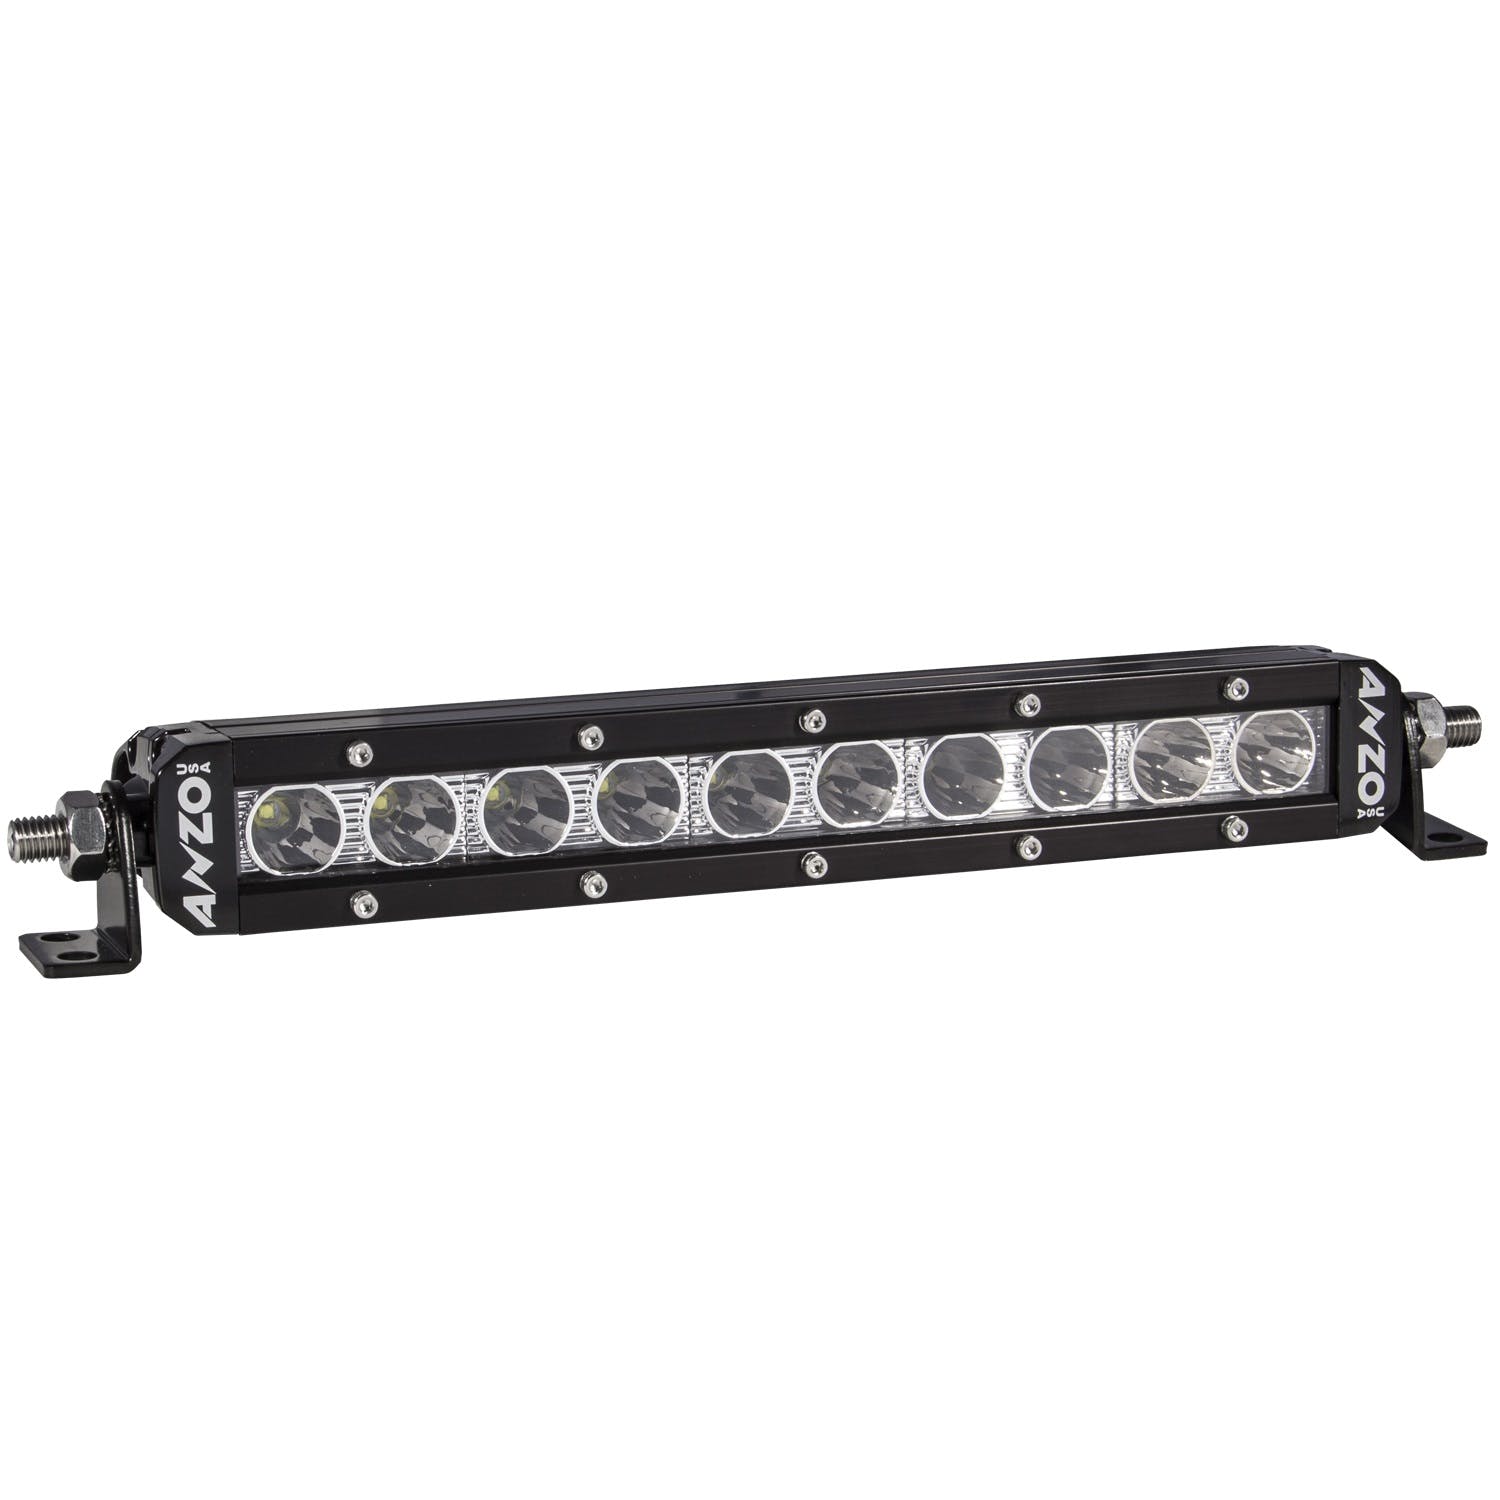 AnzoUSA 881047 Rugged Off Road Light 10" 5W High Intensity LED Single Row (Spot)